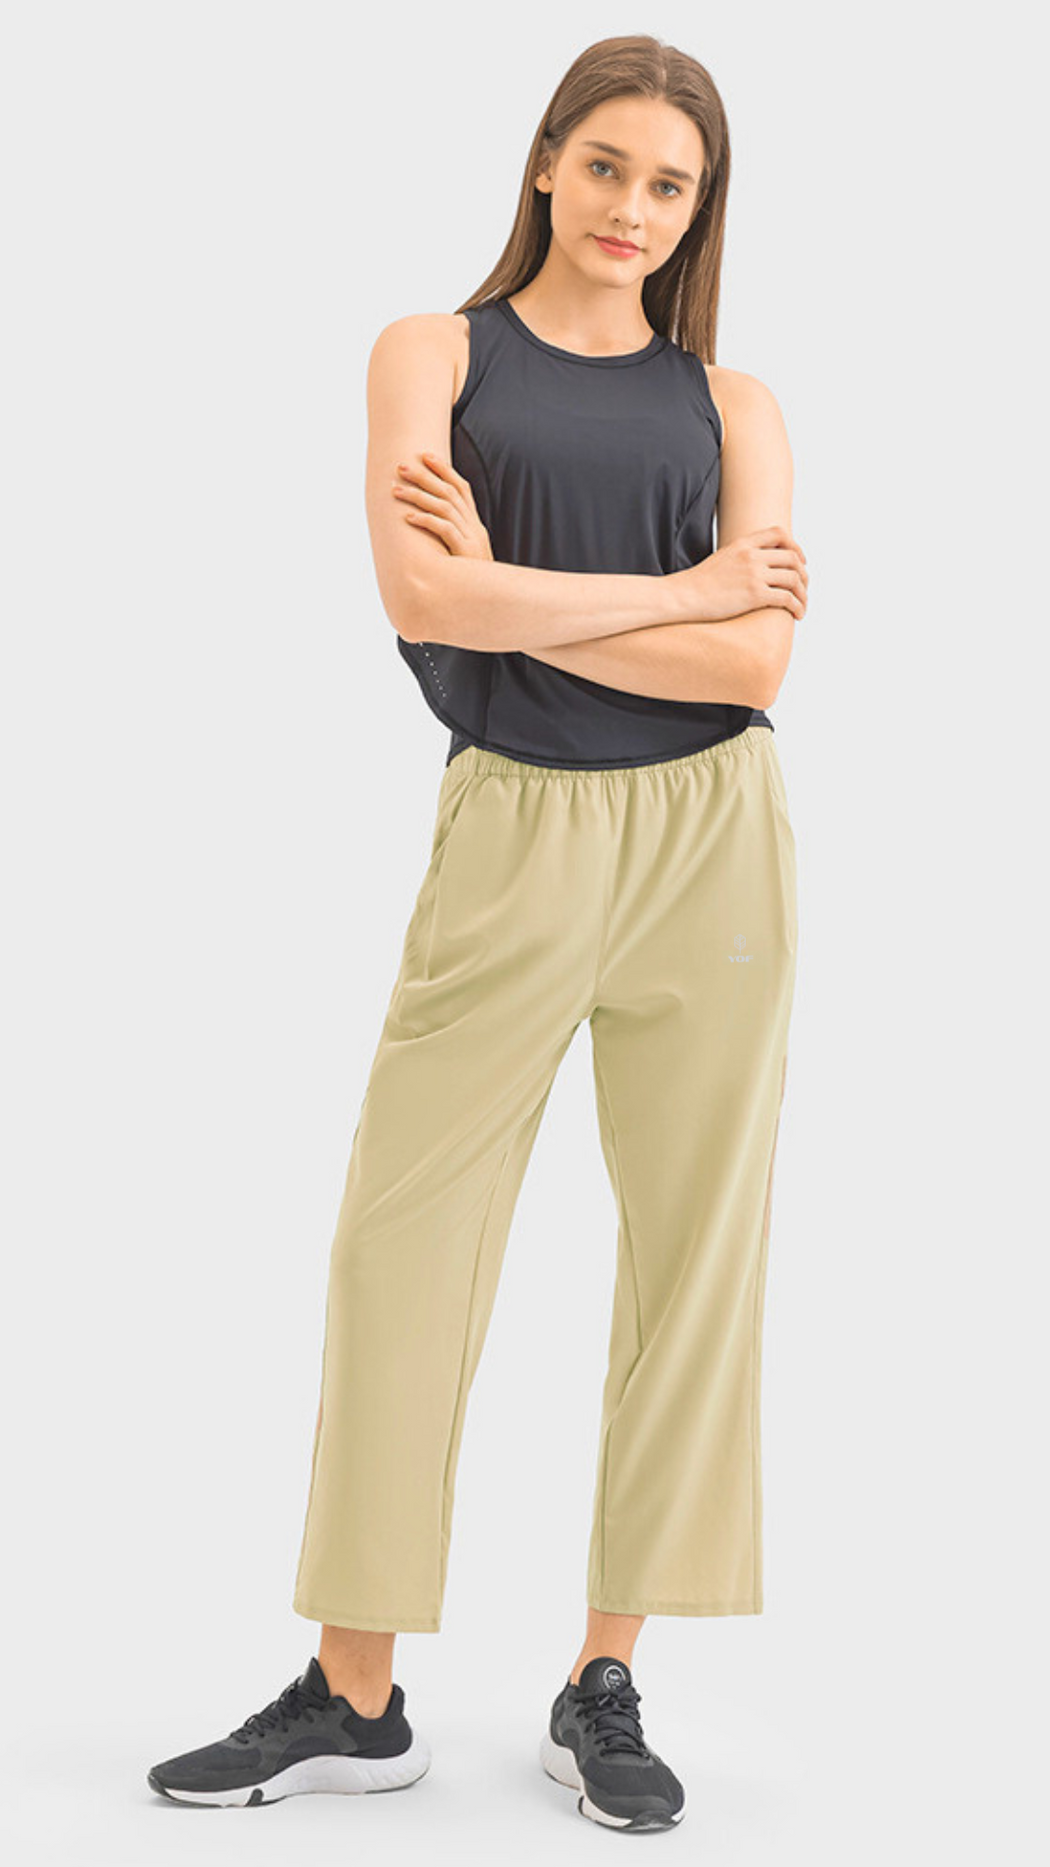 EasyFlow Mid-Rise Tapered Crop Leggings 23" (Asian Fit)